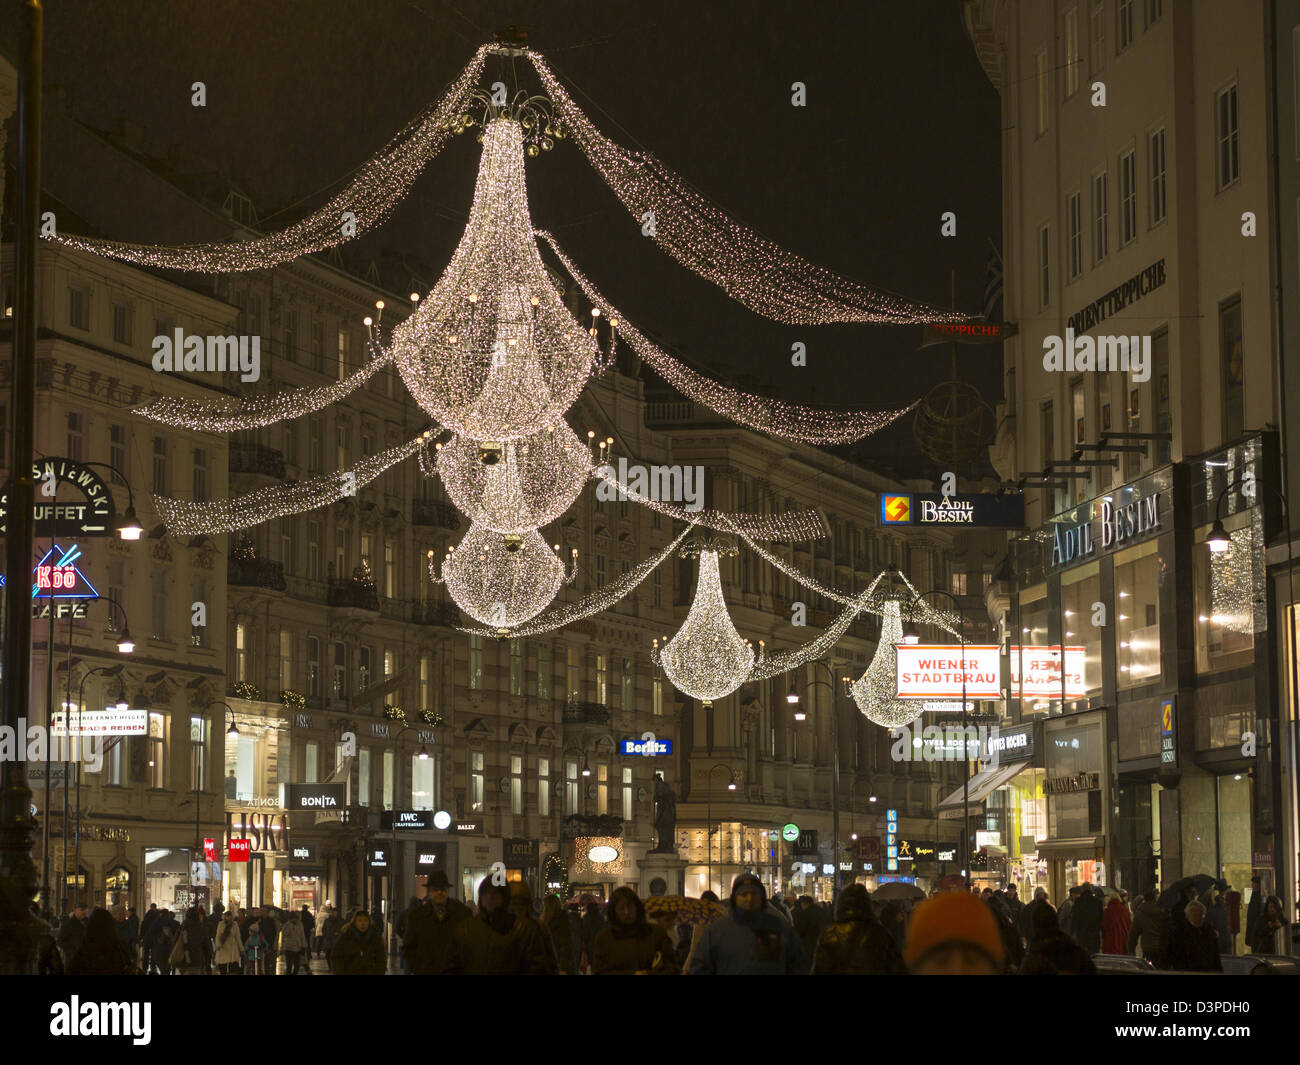 Der Graben lit up for Advent. Christmas chandeliers decorate this famous Vienna shopping street. Stock Photo